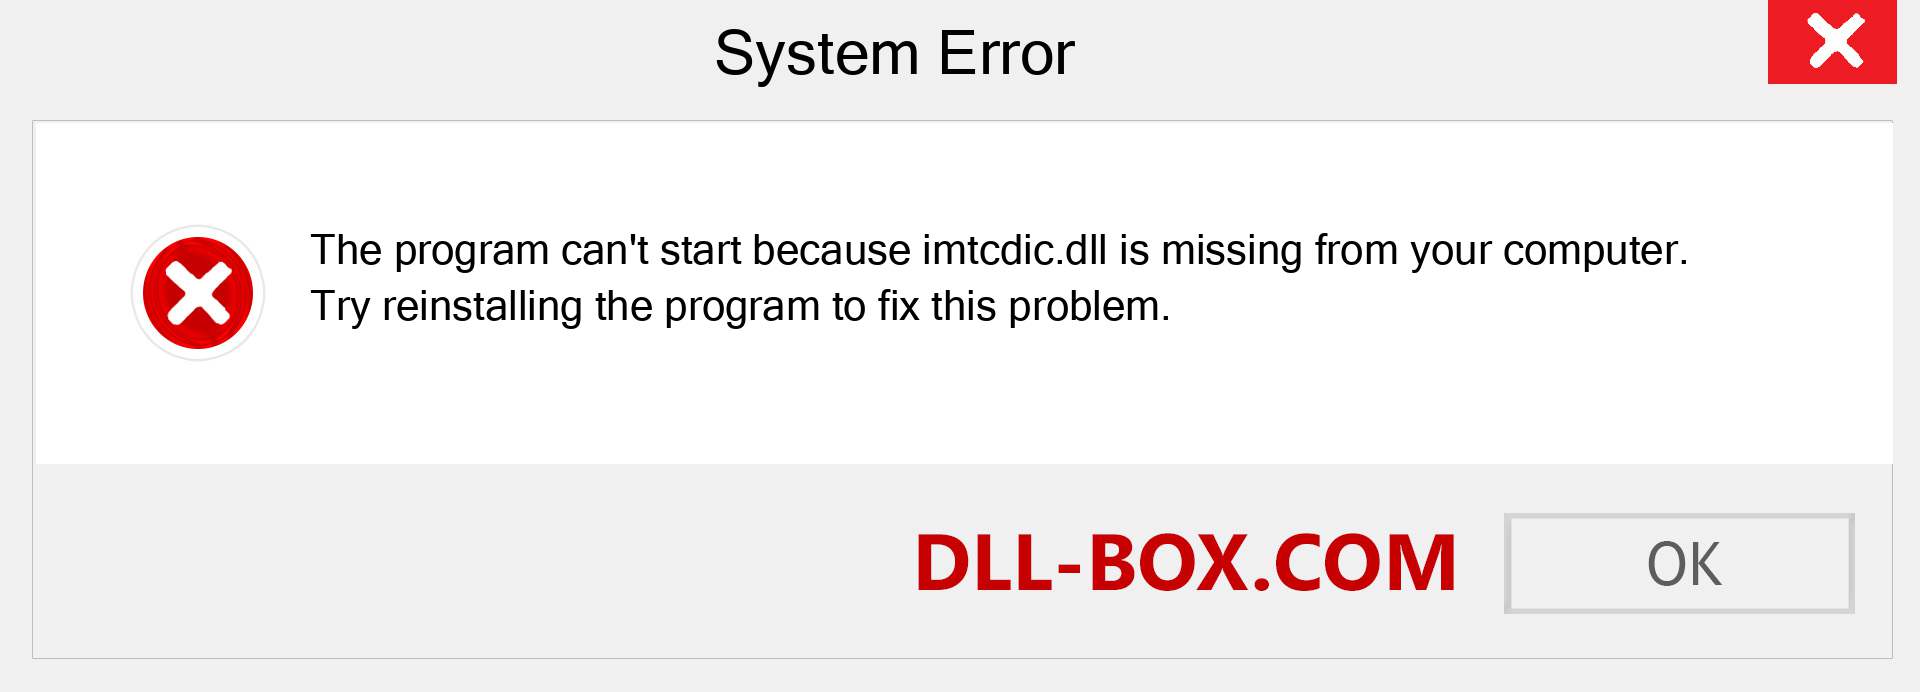  imtcdic.dll file is missing?. Download for Windows 7, 8, 10 - Fix  imtcdic dll Missing Error on Windows, photos, images